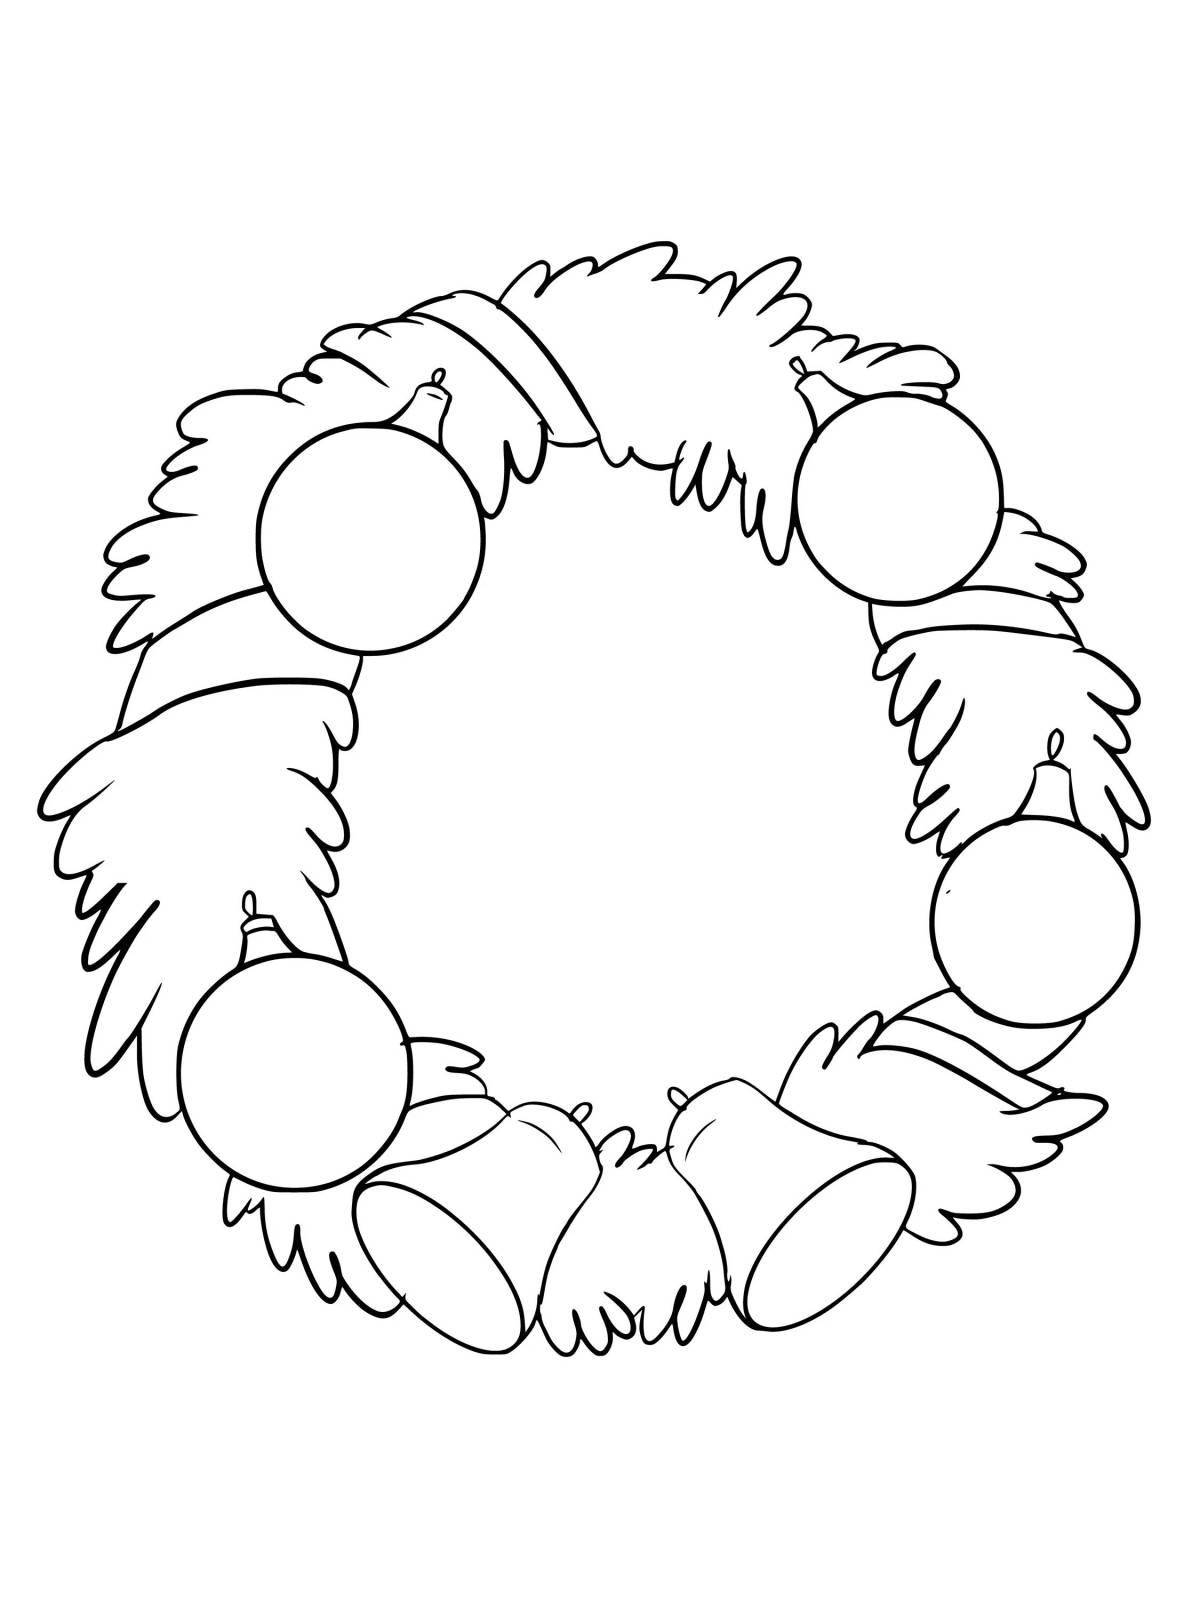 Large Christmas wreath coloring book for kids